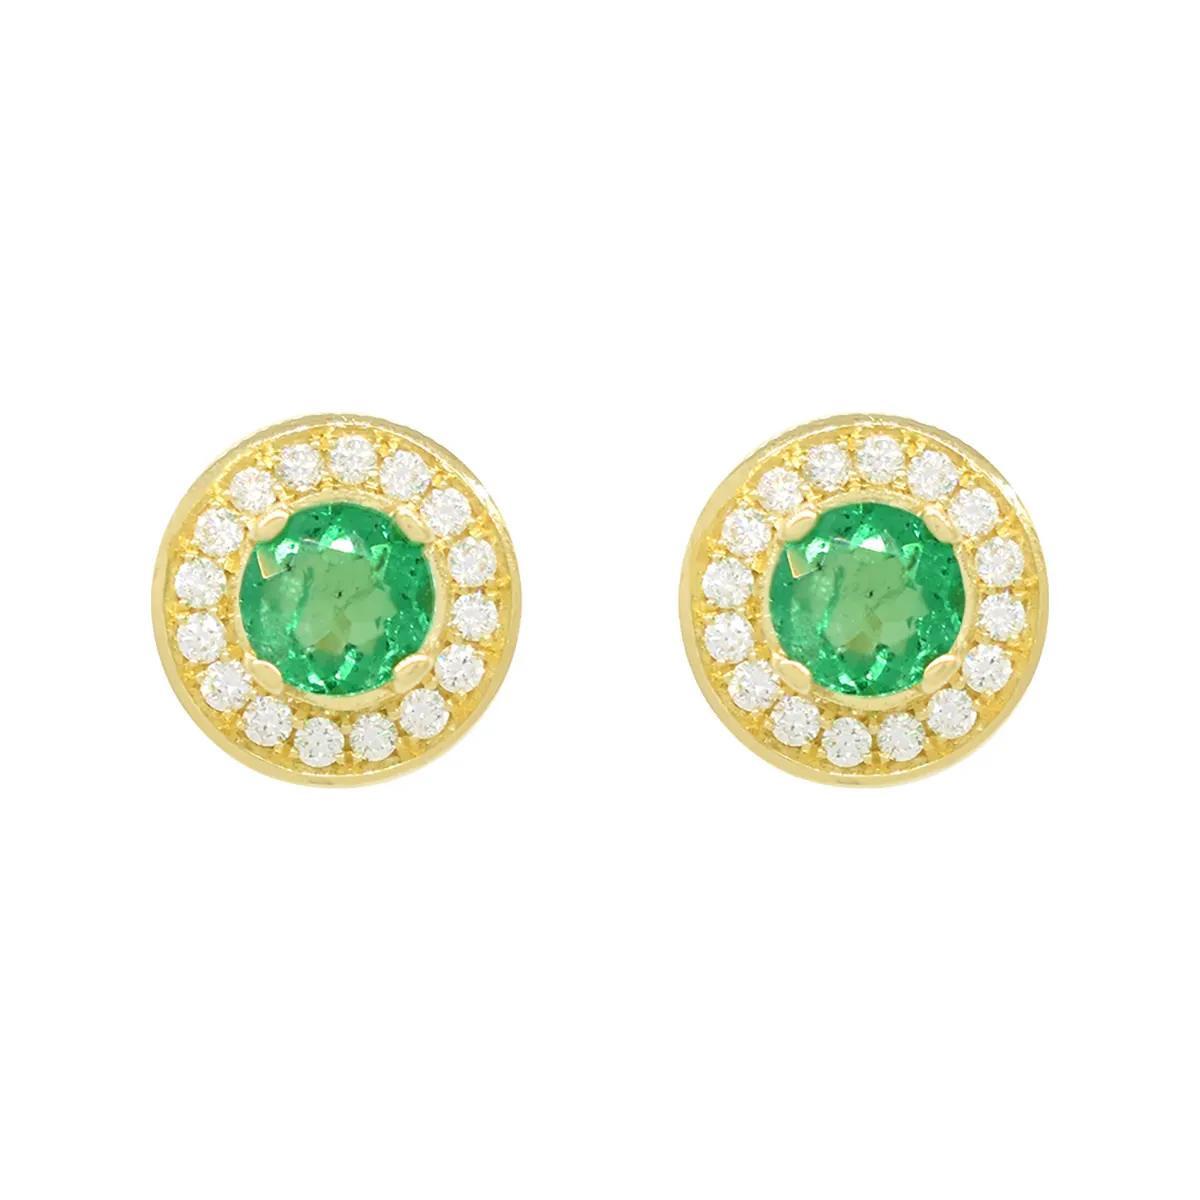 Natural Colombian emeralds and genuine brilliant cut diamonds in solid 18K yellow gold stud earrings